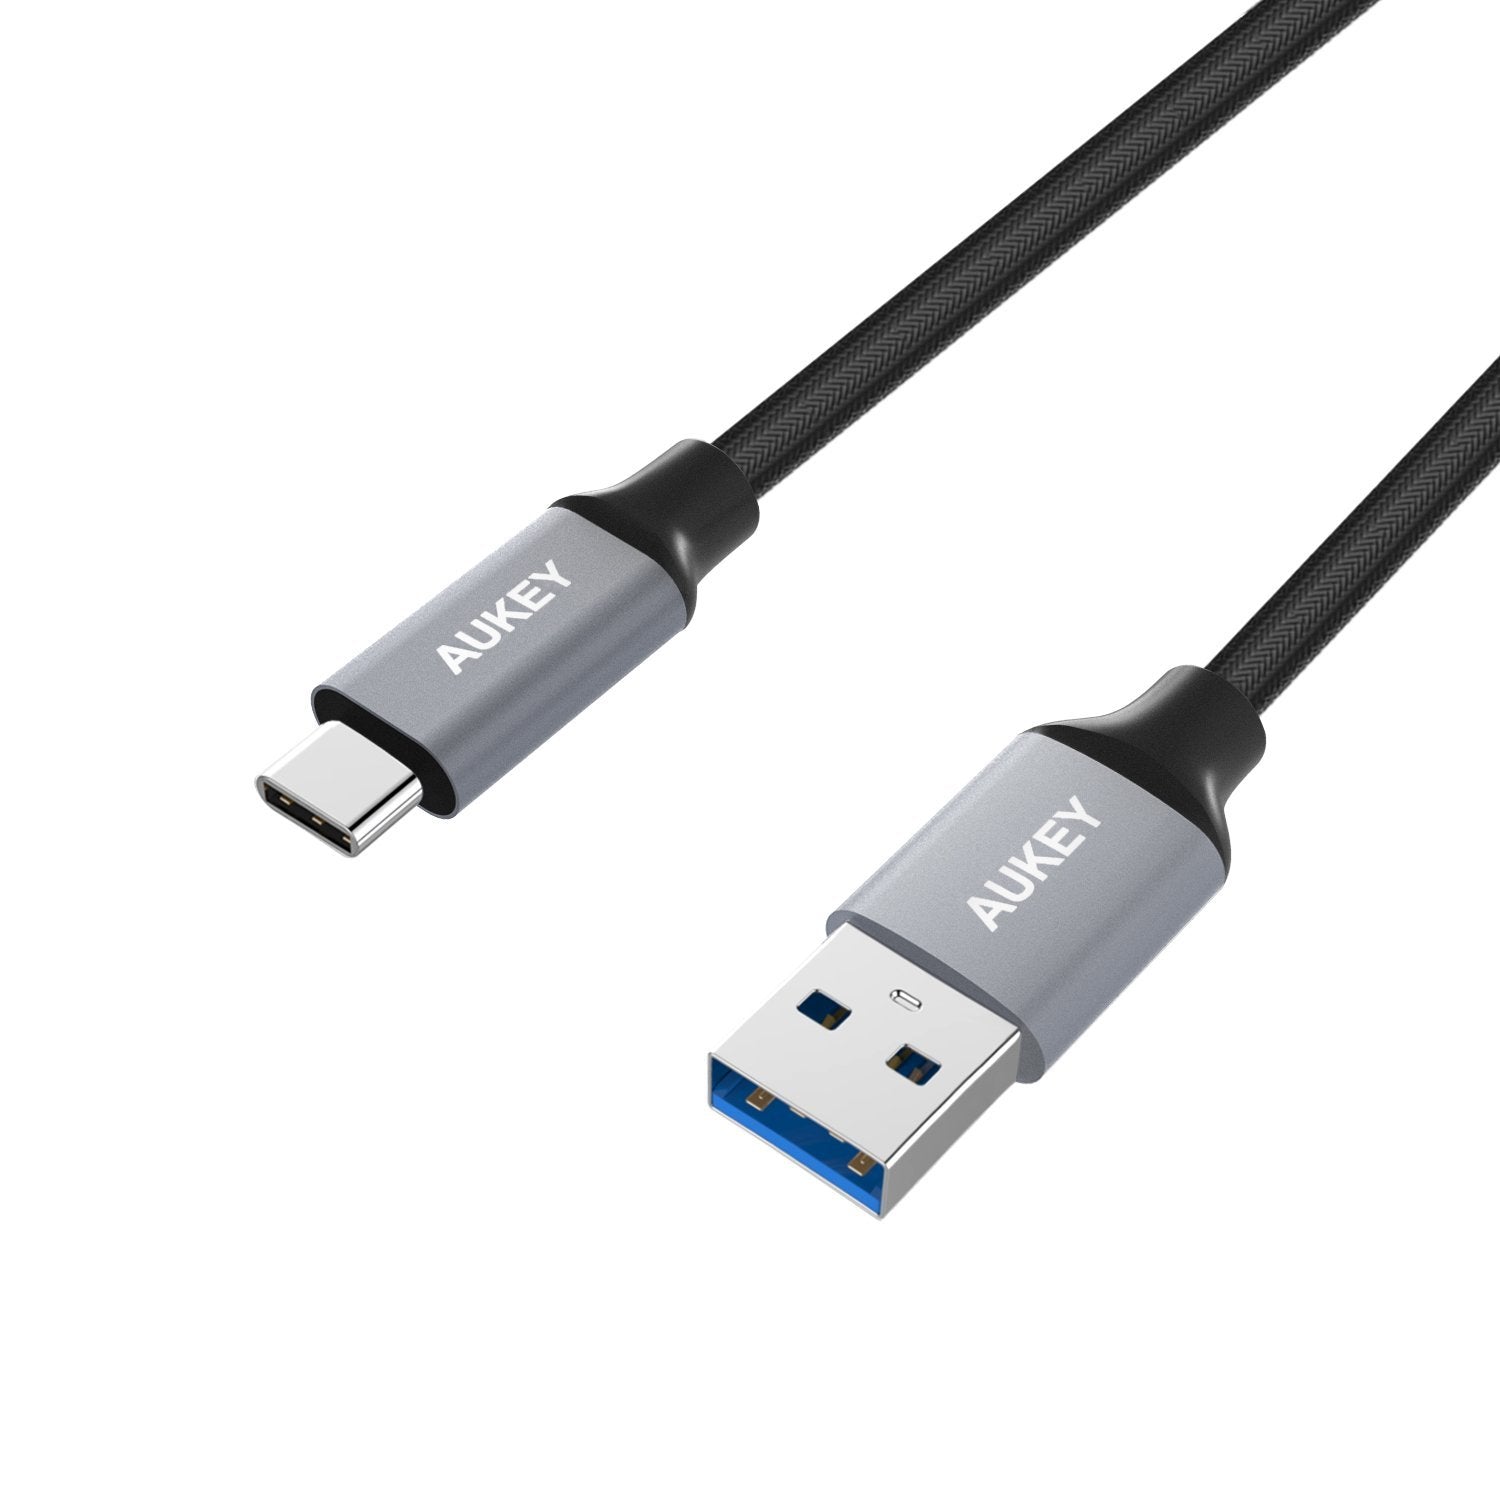 AUKEY CB-CMD1 Impulse Series 3-Pack USB 3.1 Gen 1 USB-A to C Cable (1m x 3)